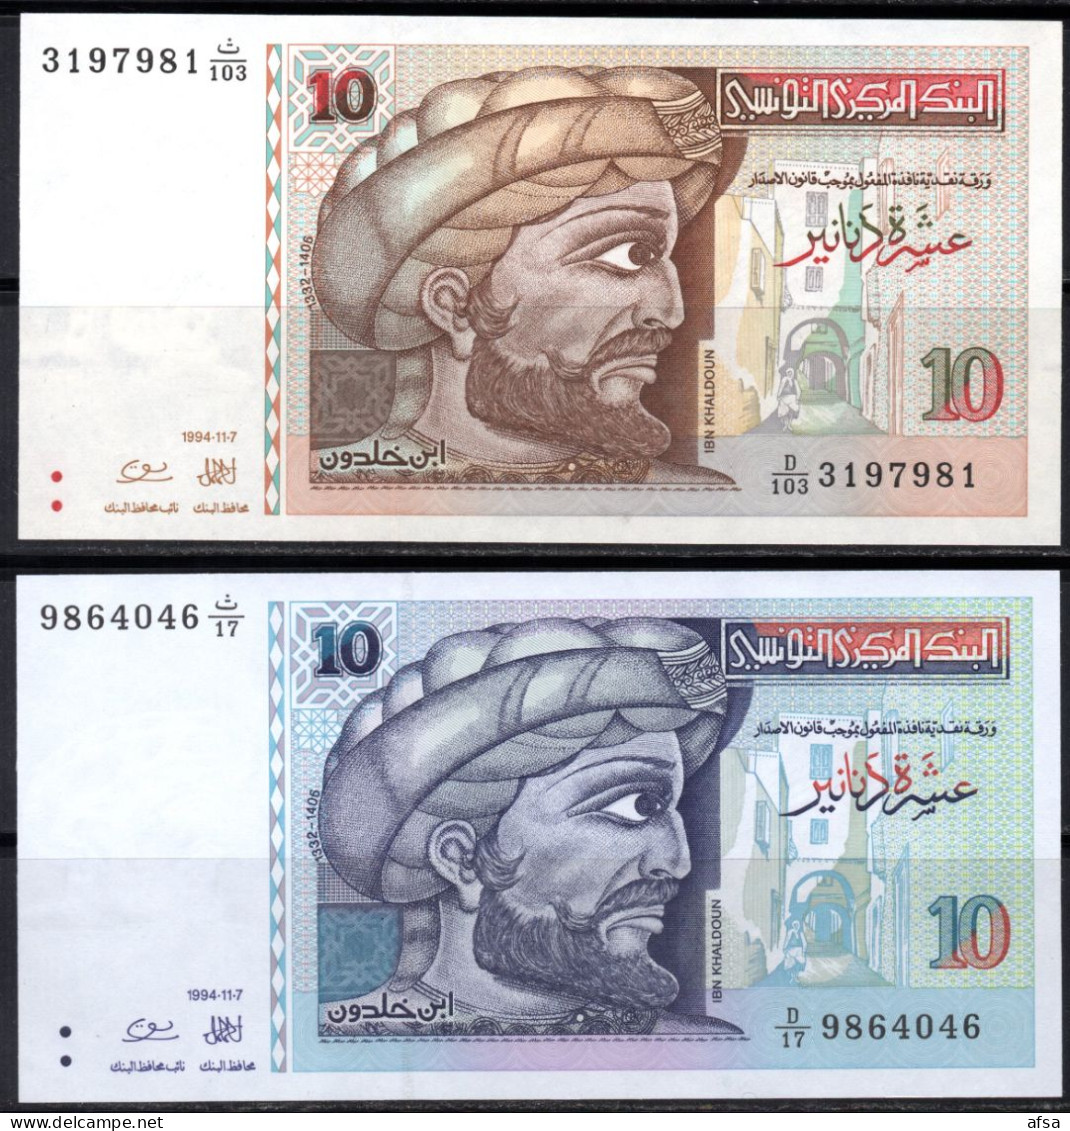 2 X 10 Dinars -P 87 And P 87A - 1994 UNC** -NEUFS** (2 Scans) - Tusesië